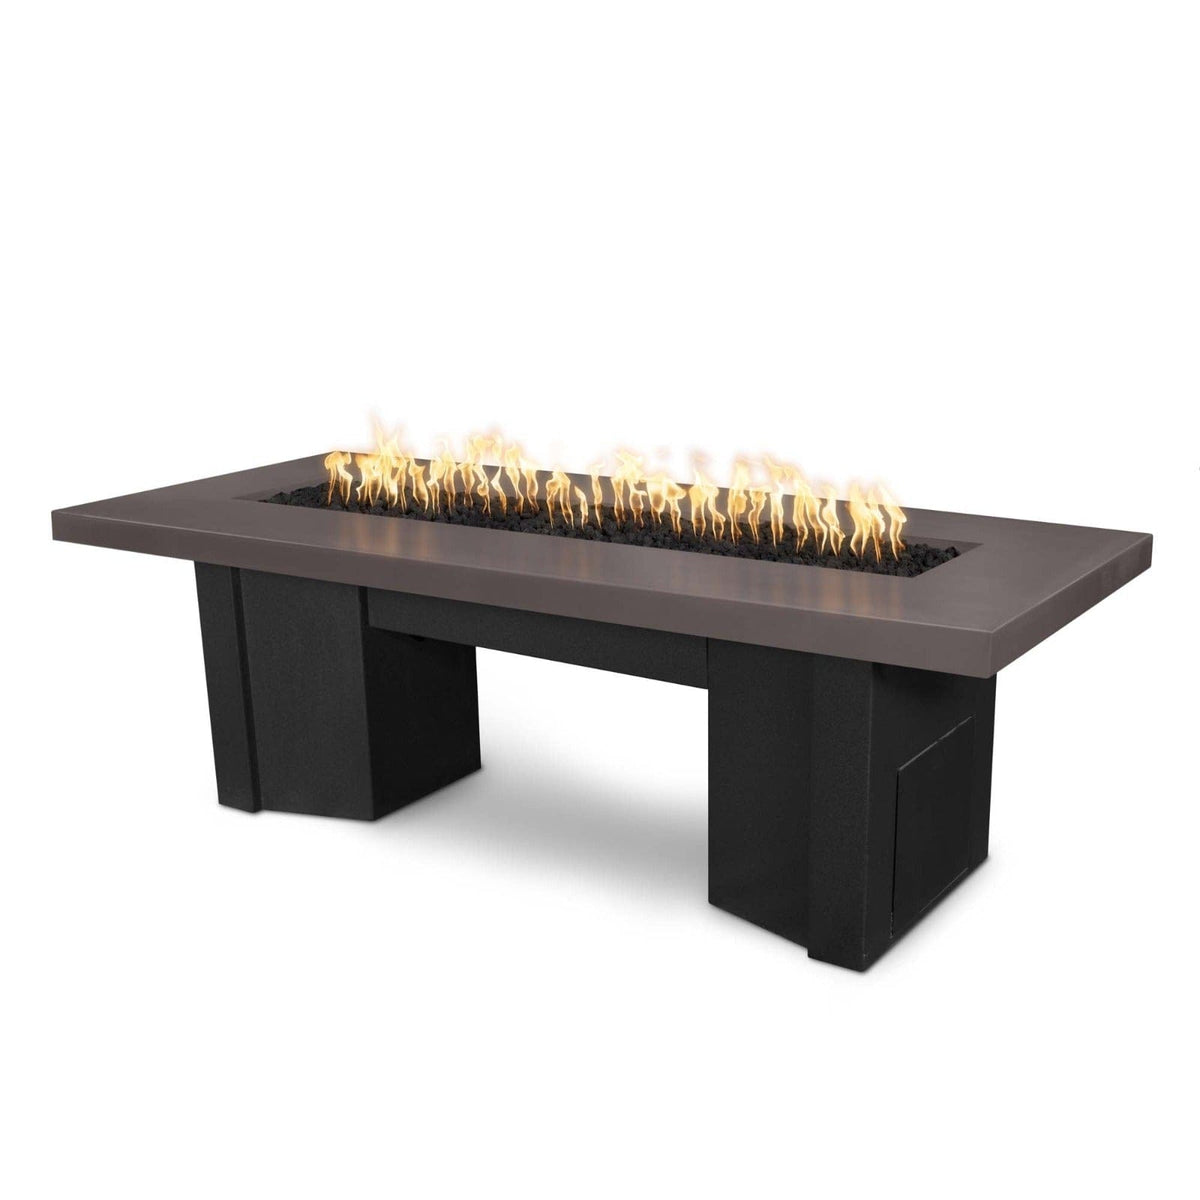 The Outdoor Plus Fire Features Chestnut (-CST) / Black Powder Coated Steel (-BLK) The Outdoor Plus 78&quot; Alameda Fire Table Smooth Concrete in Liquid Propane - Match Lit with Flame Sense System / OPT-ALMGFRC78FSML-LP